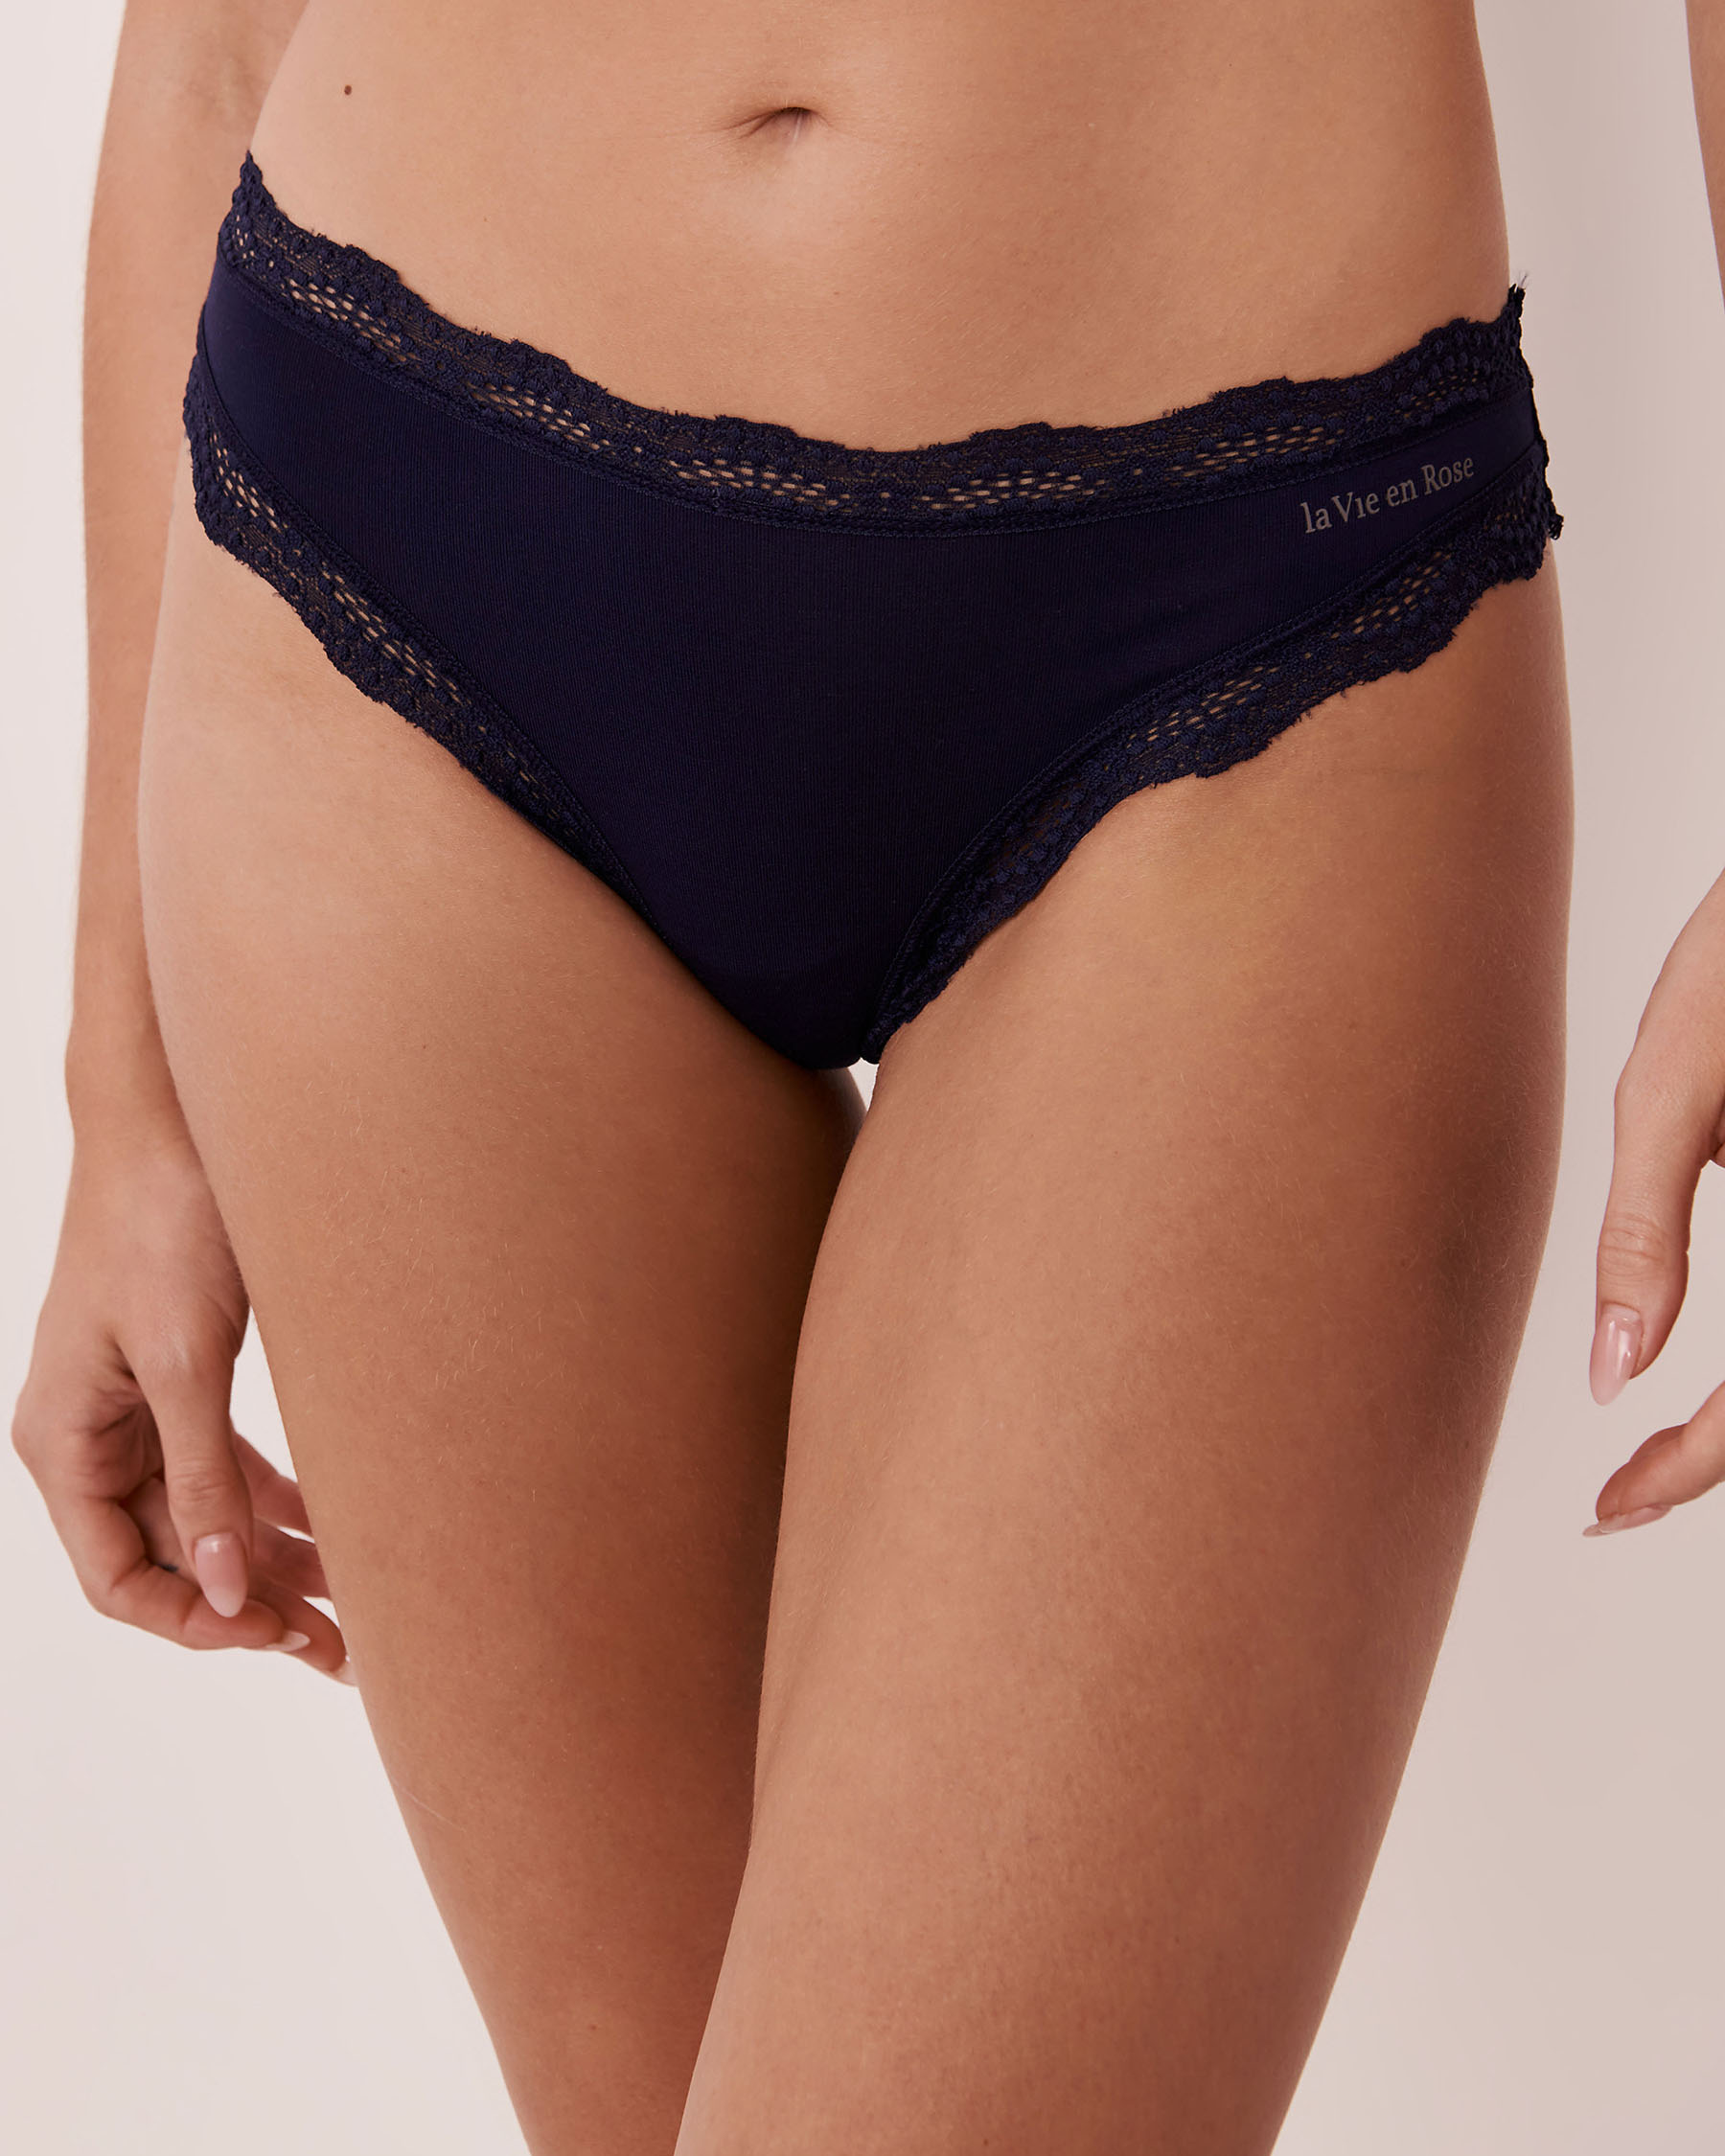 LA VIE EN ROSE Modal and Lace Trim Thong Panty Midnight sky 20100220 - View1